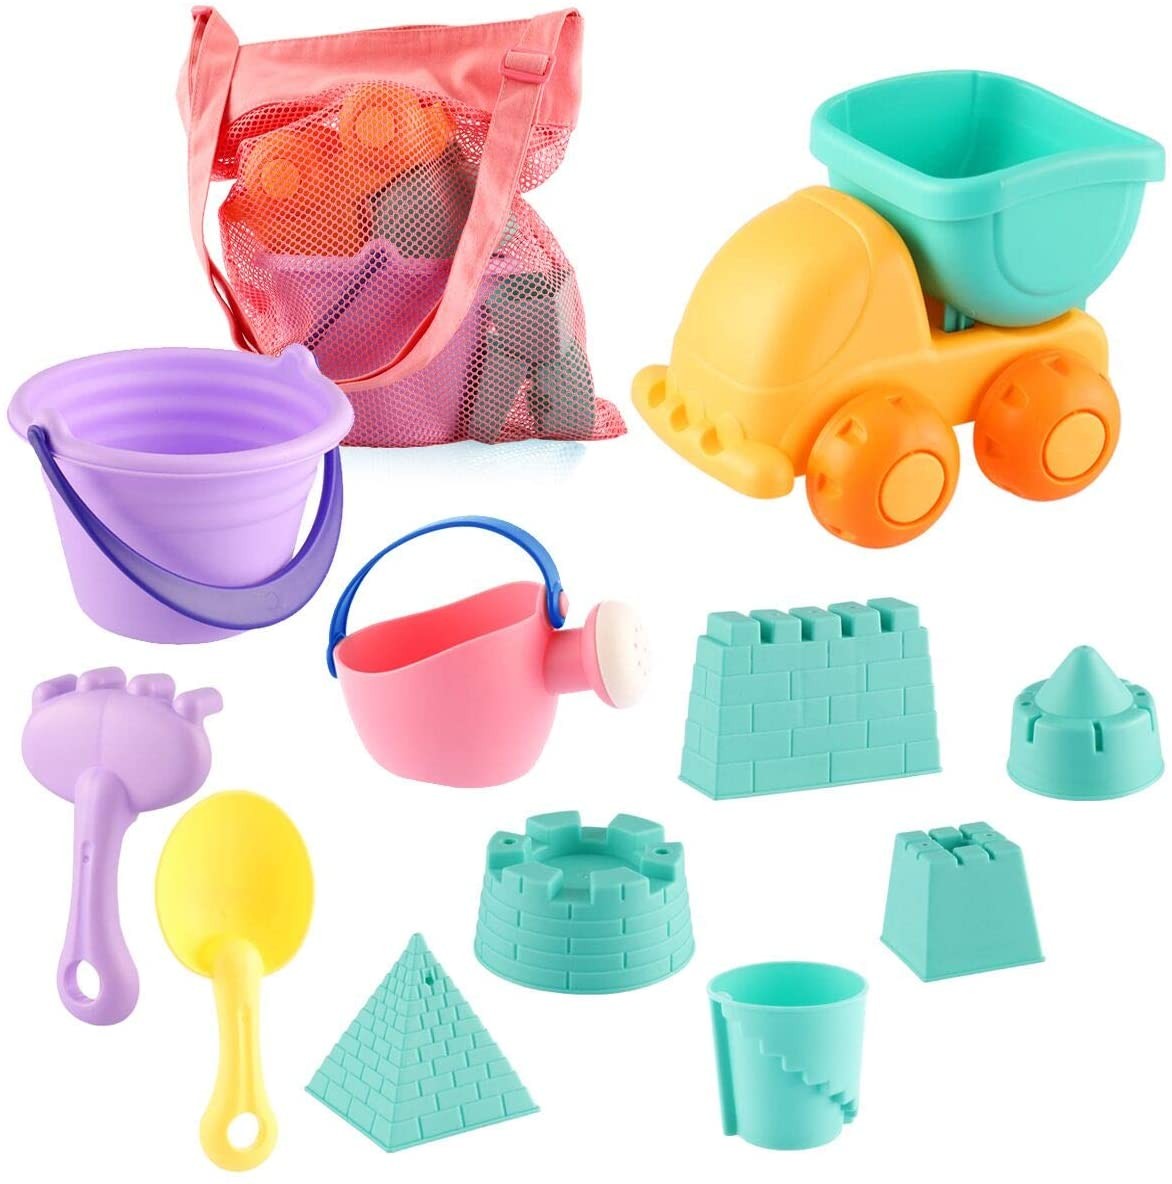 Beach Toys Set for Kids Toddlers 11pcs Beach Sand Toy Set Including Sand Truck, Watering CanBeach